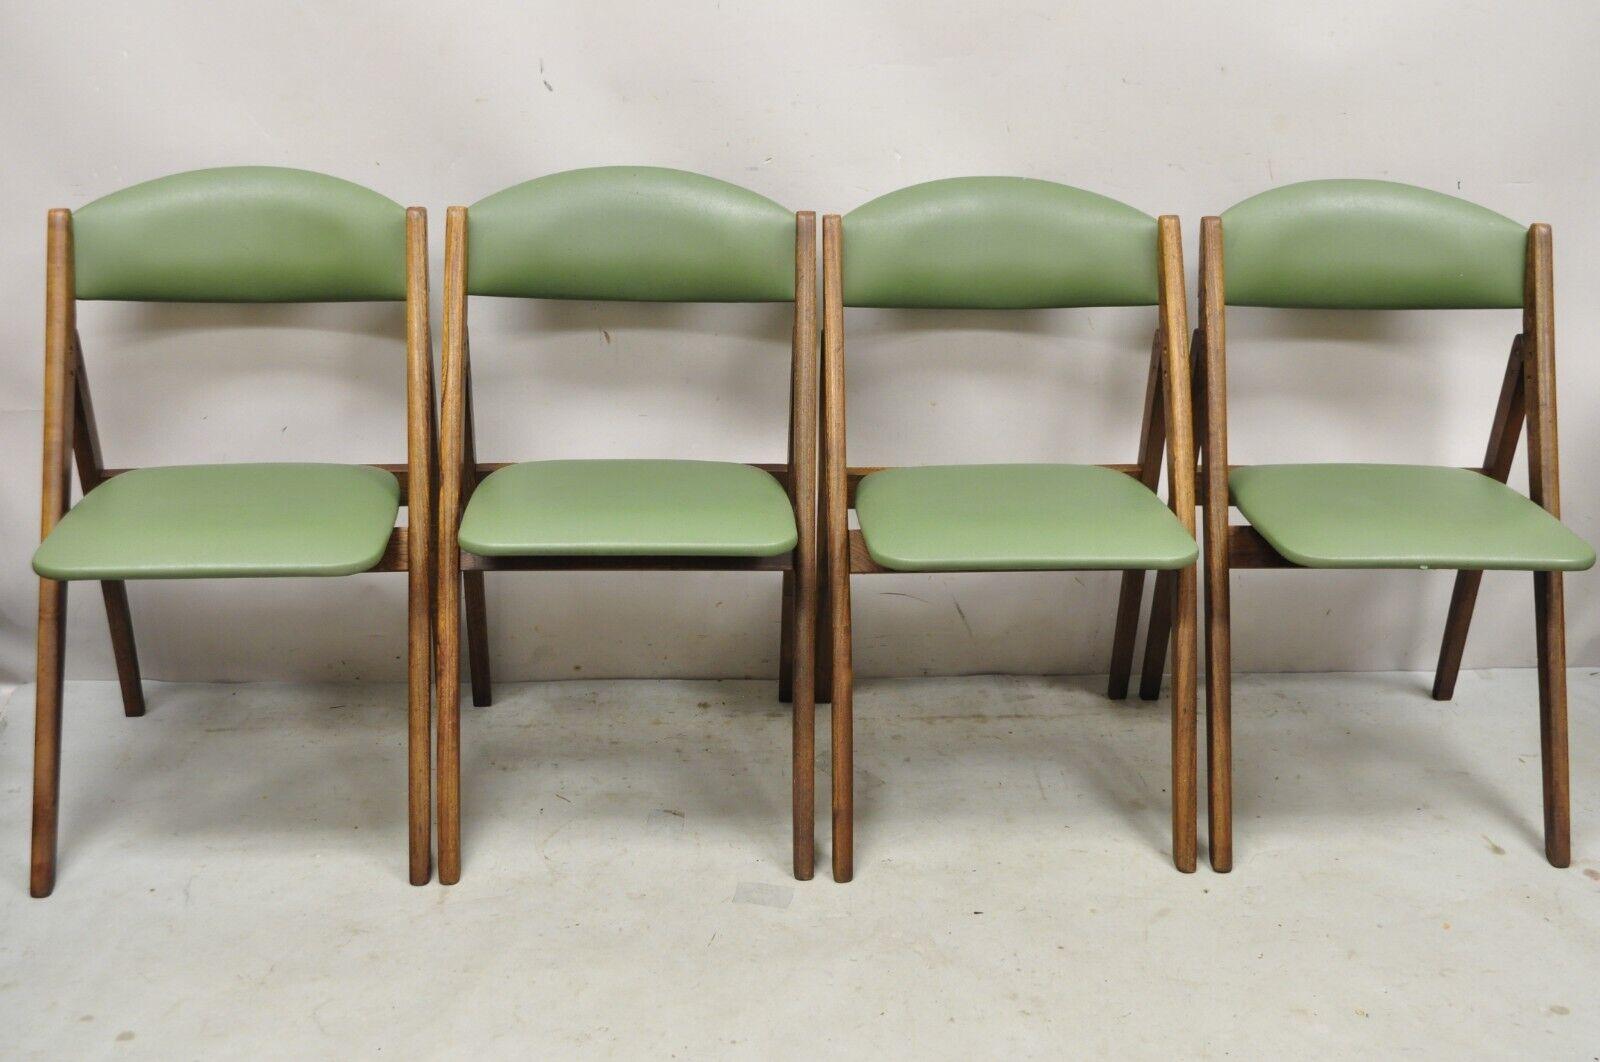 Vintage Stakmore Green Mid-Century Modern Folding Game Chairs - Set of 4. Item features Green vinyl upholstery, solid wood frames, original labels, clean modernist lines, great style and form. Circa Mid-20th century.
Measurements:
Open: 31